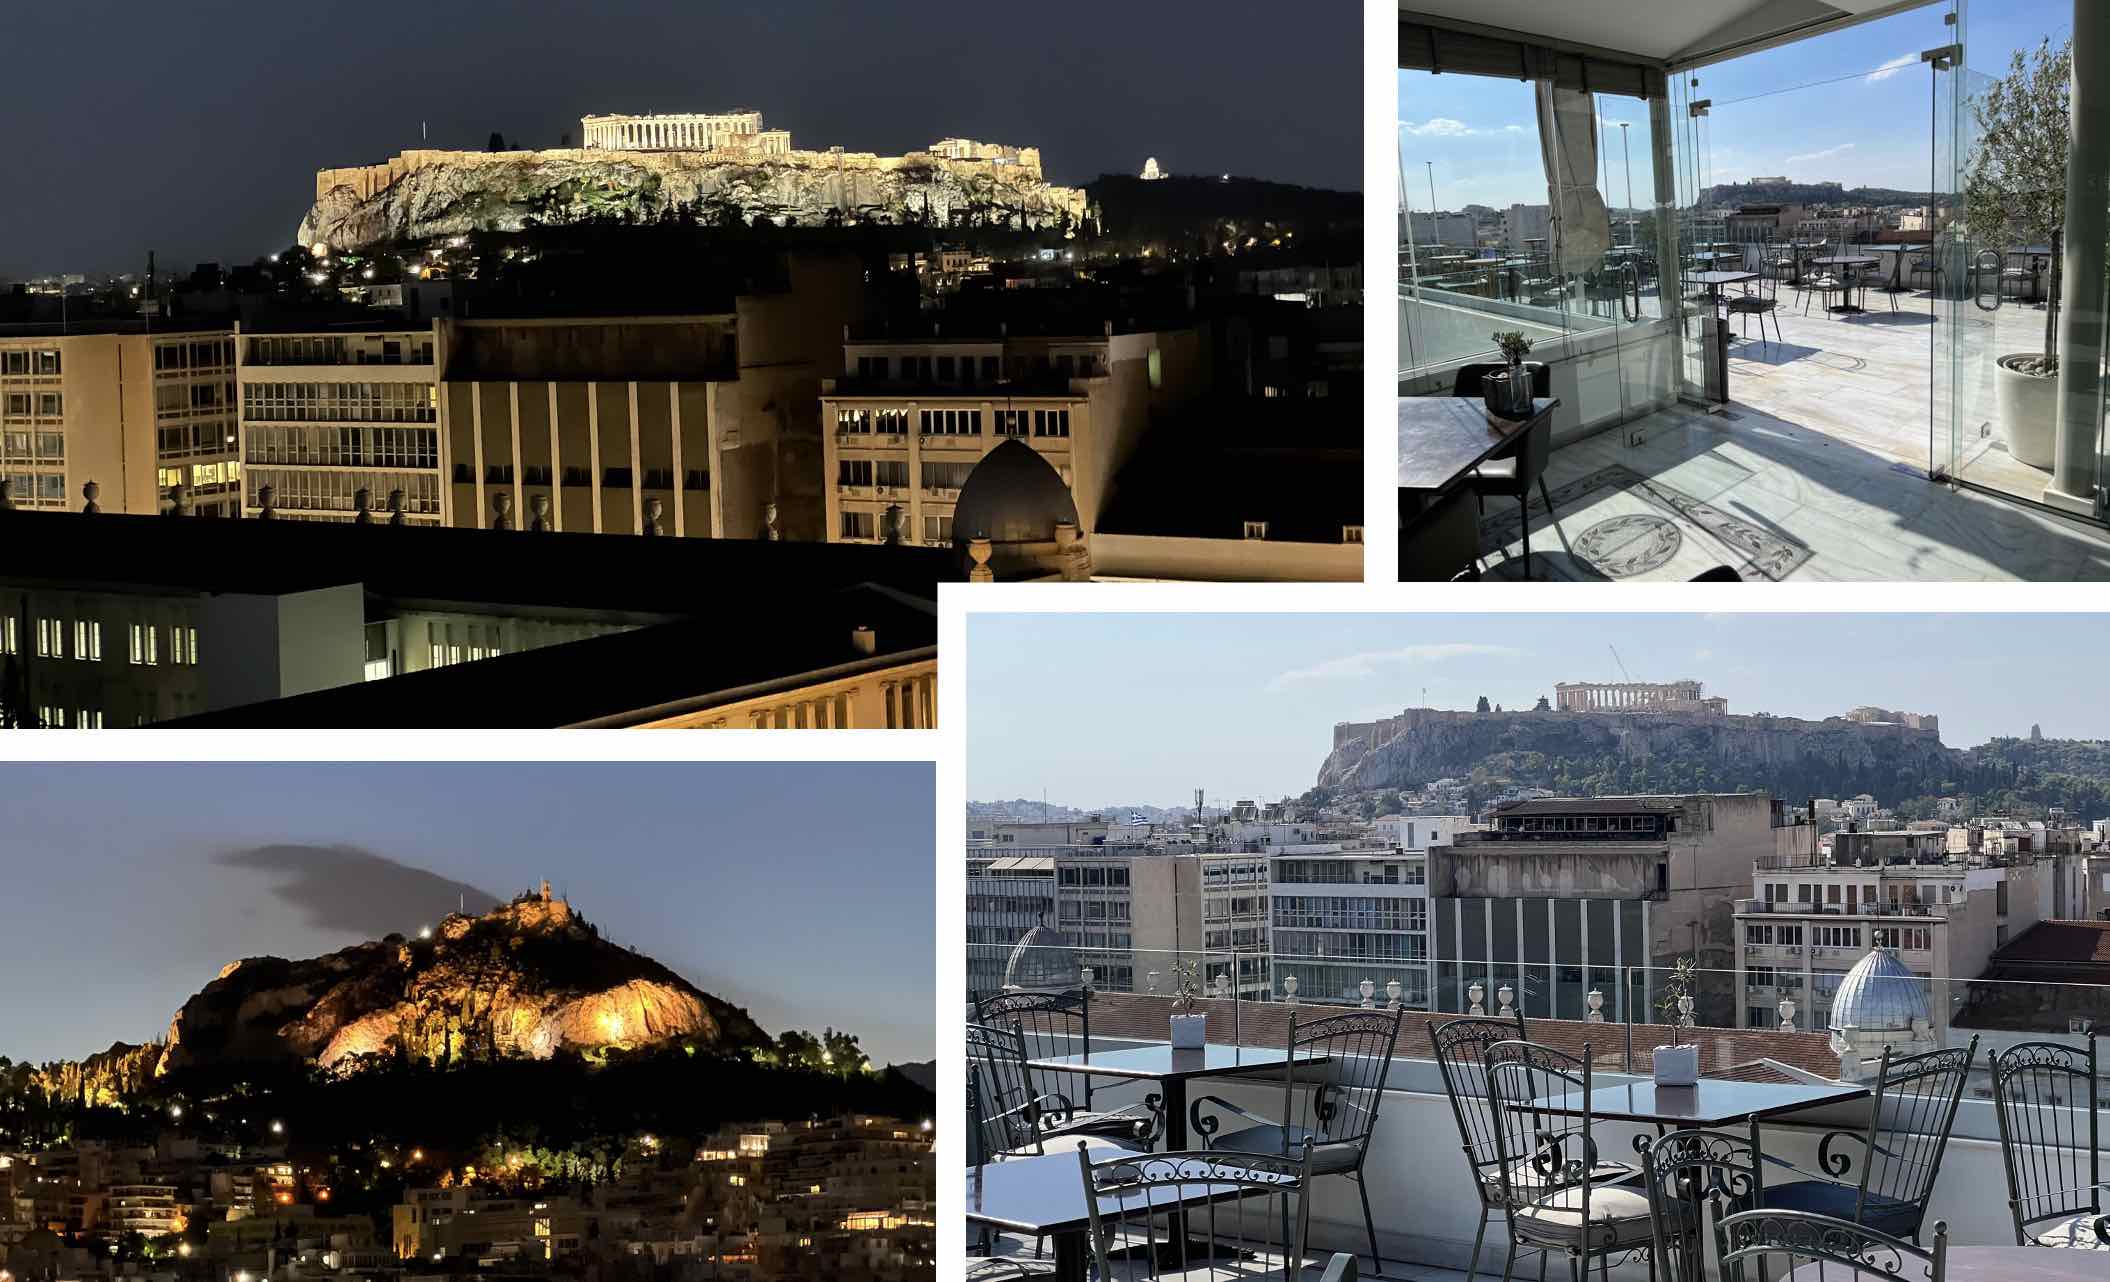 A series of four pictures from the Olive Garden restaurant on the 11th floor of Hotel Titania showing the balcony and
              views of the Acropolis and Lycabettus Hill